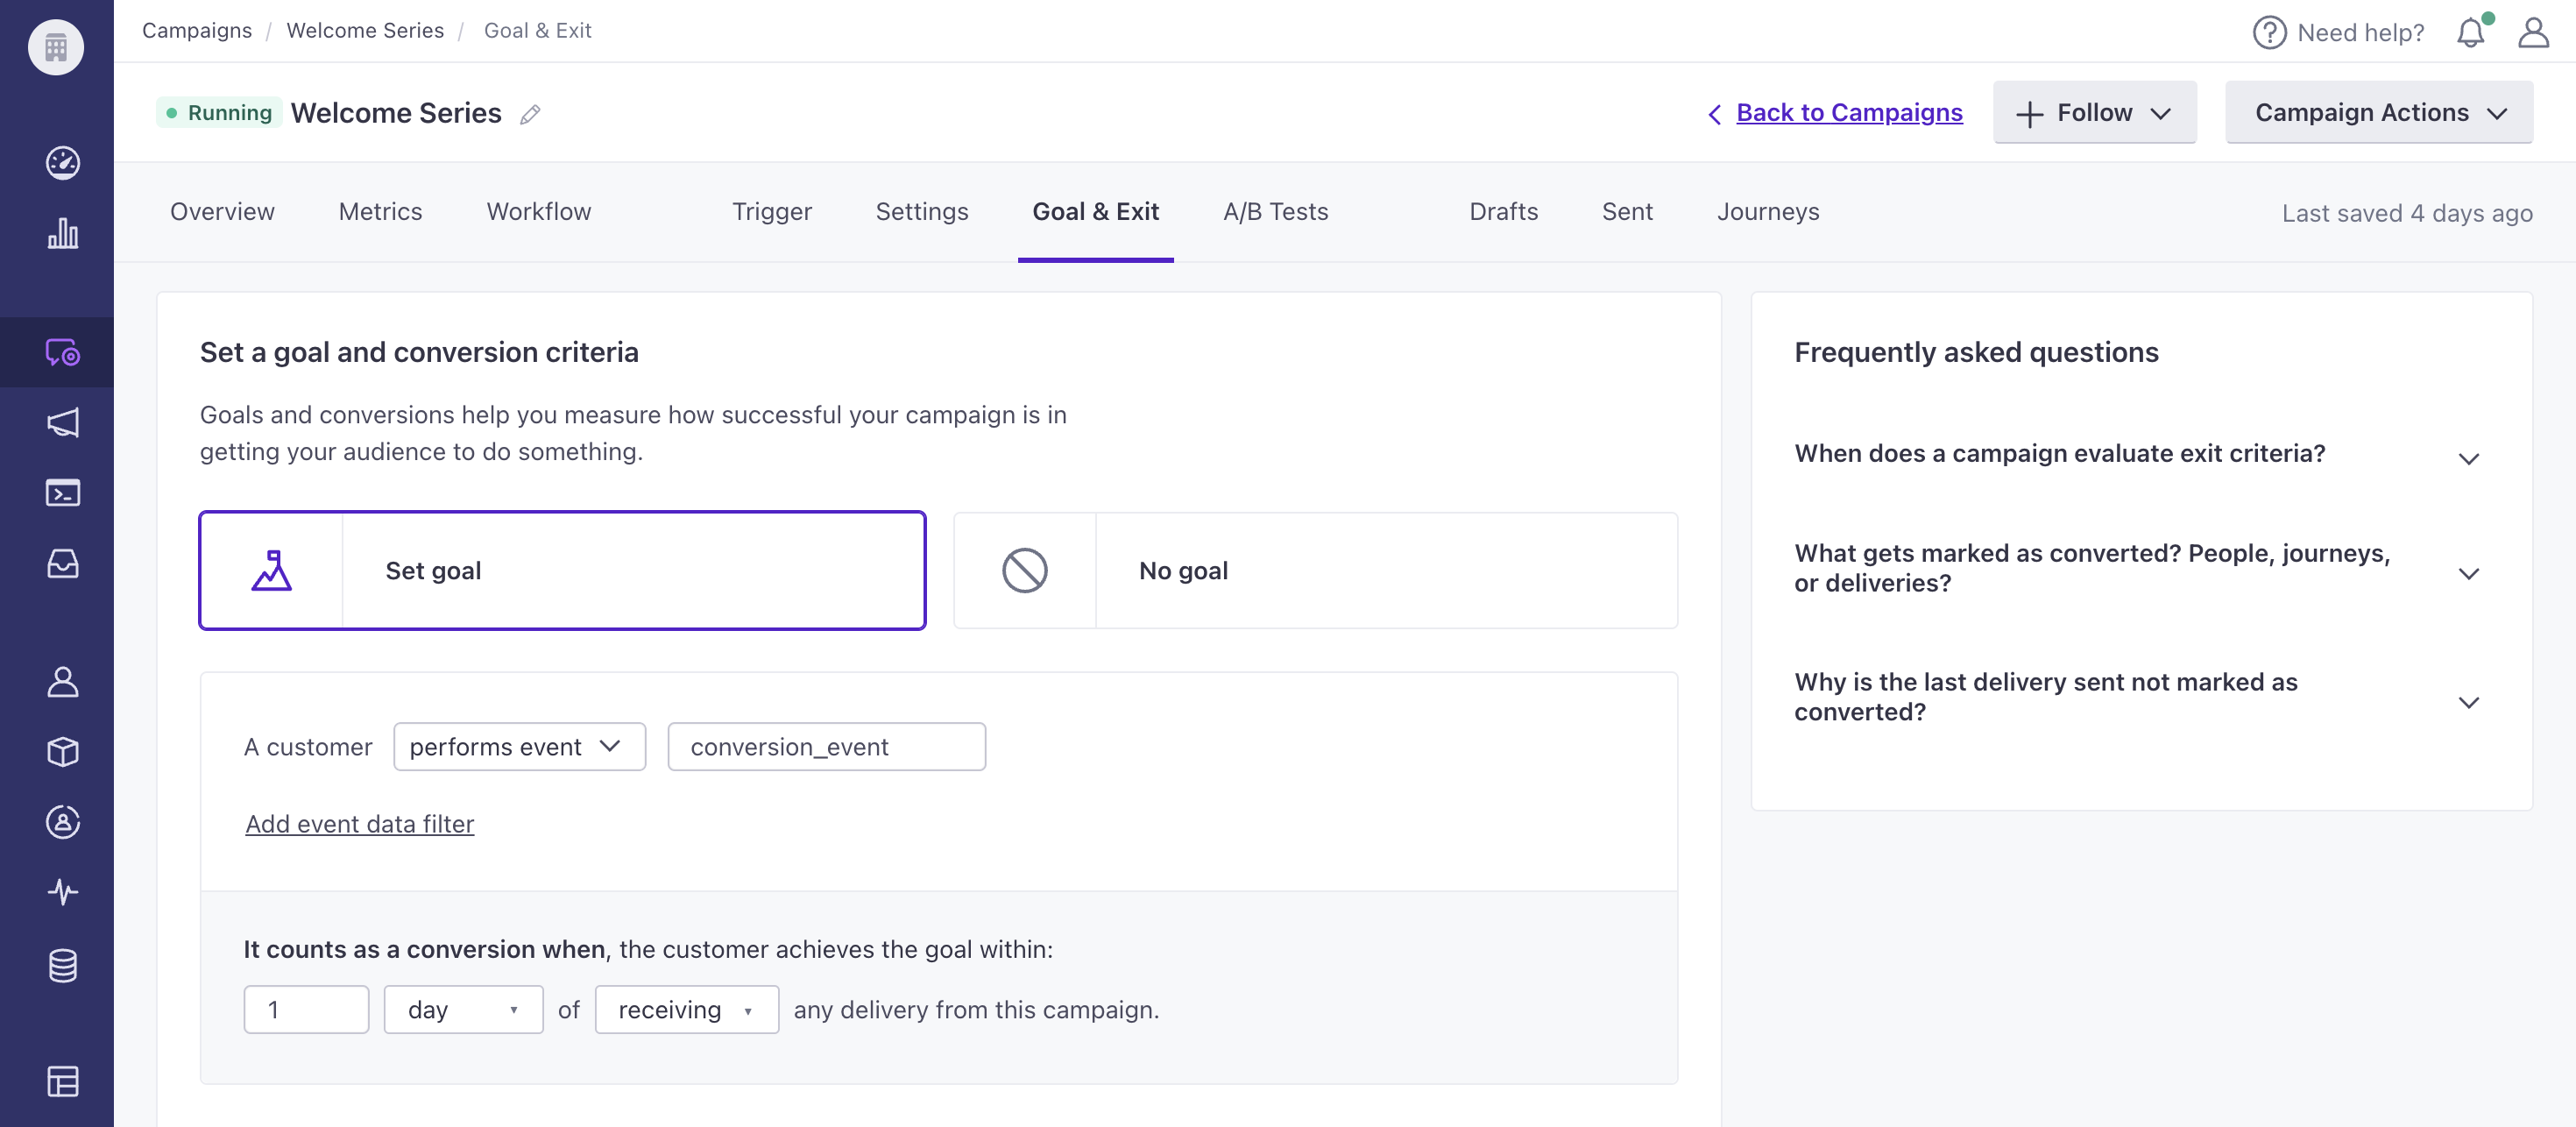 Set Goal is highlighted. The goal is achieved when a customer performs event conversion_event. It counts as a conversion when the customer achieves the goal within one day of receiving any delivery from this campaign.